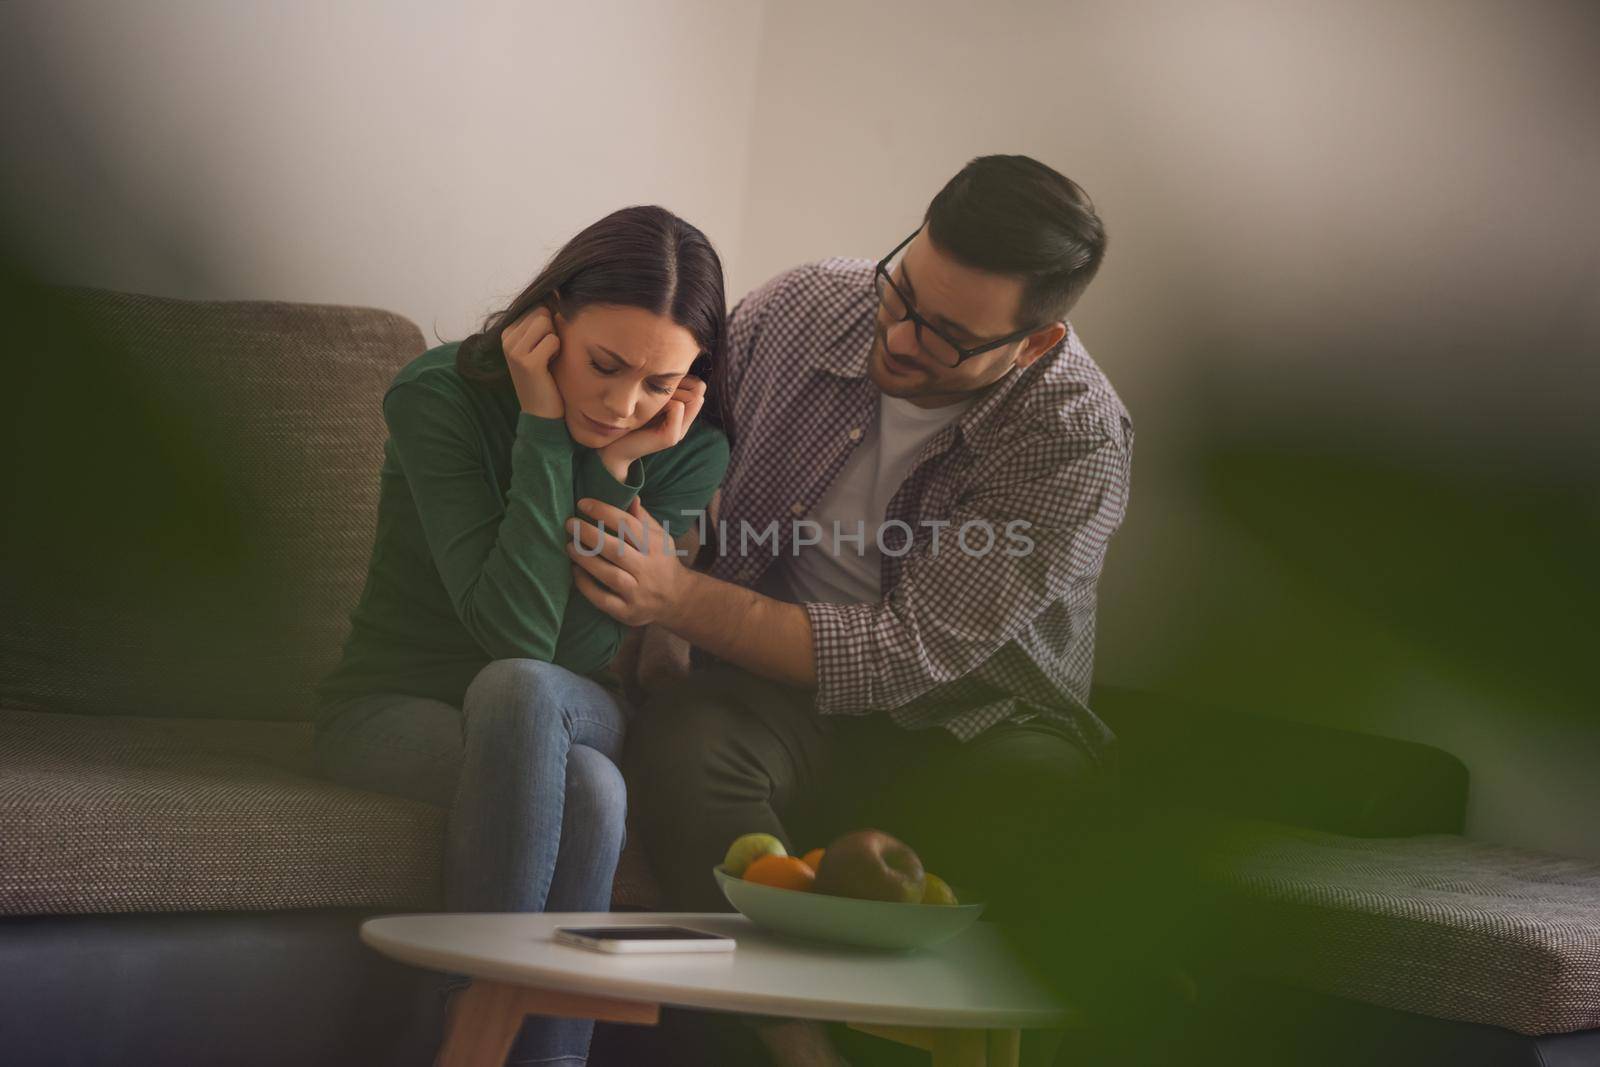 Woman is sad and depressed, her man is consoling her.